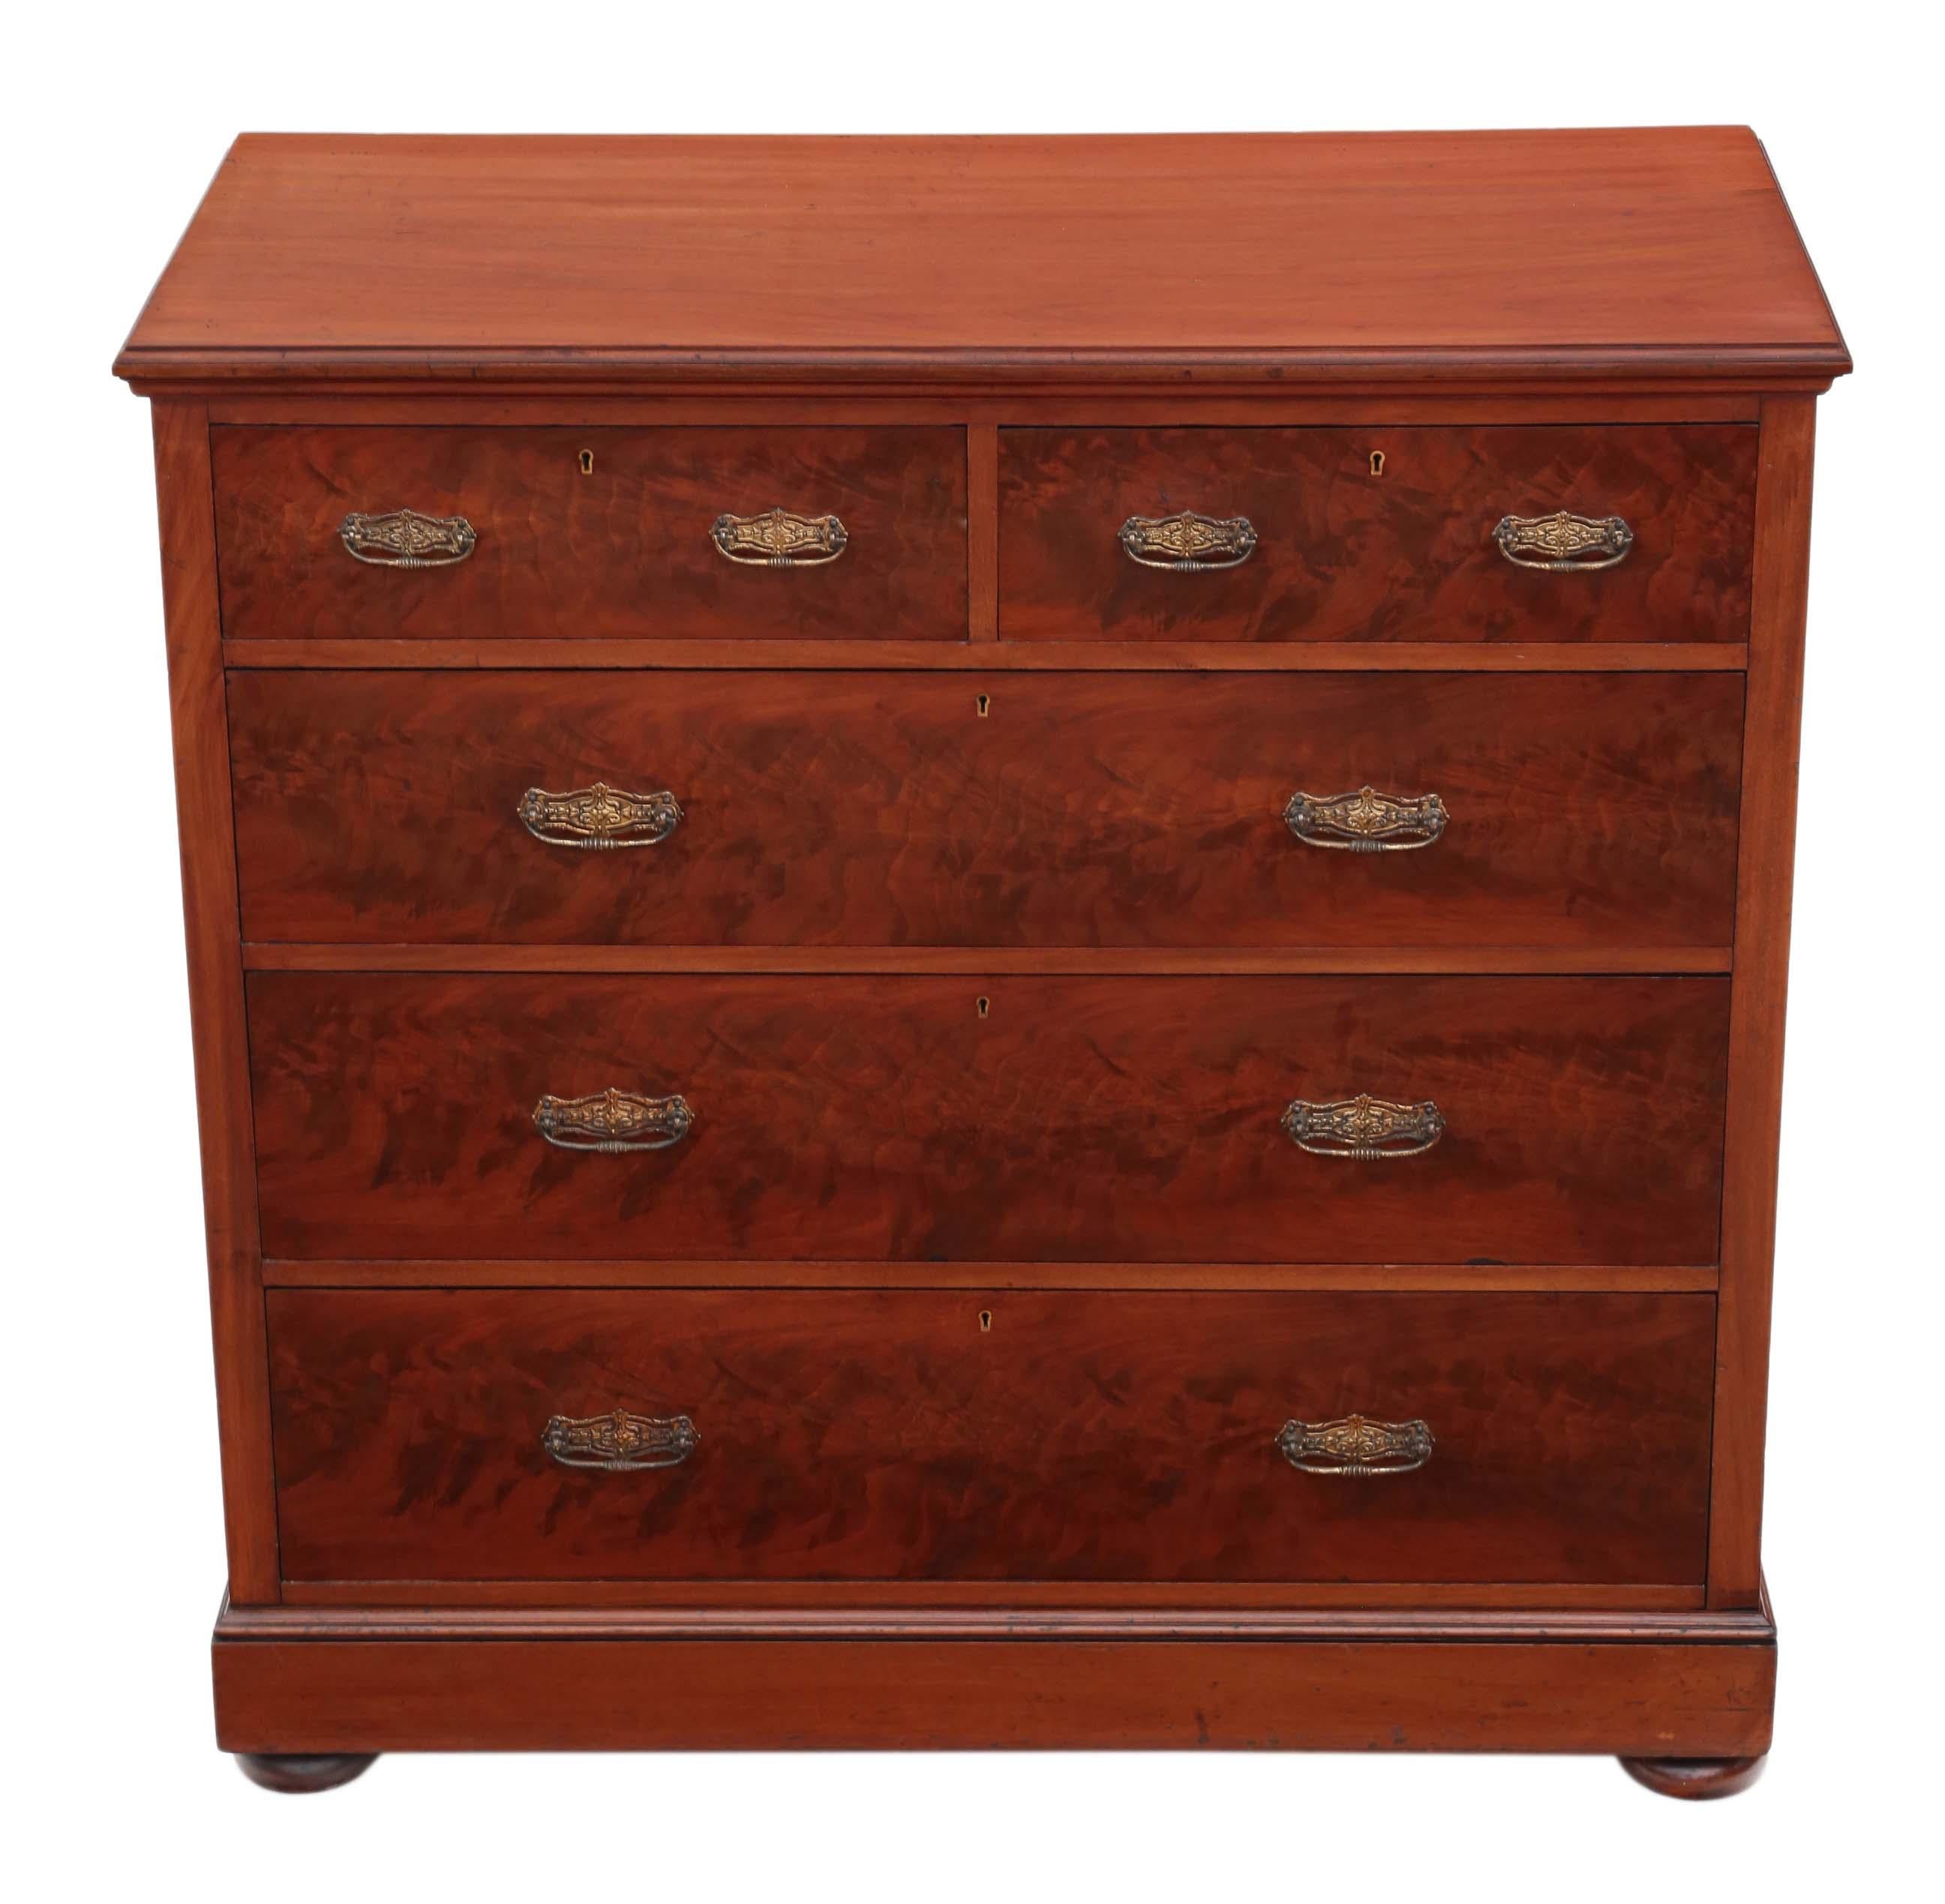 Victorian circa 1900 flame mahogany chest of drawers.

No loose joints and the ash lined drawers slide freely. A nice quality piece, with clean, simple styling.

No woodworm.

Overall maximum dimensions: 115cmW x 53cmD x 112cmH.

Historic